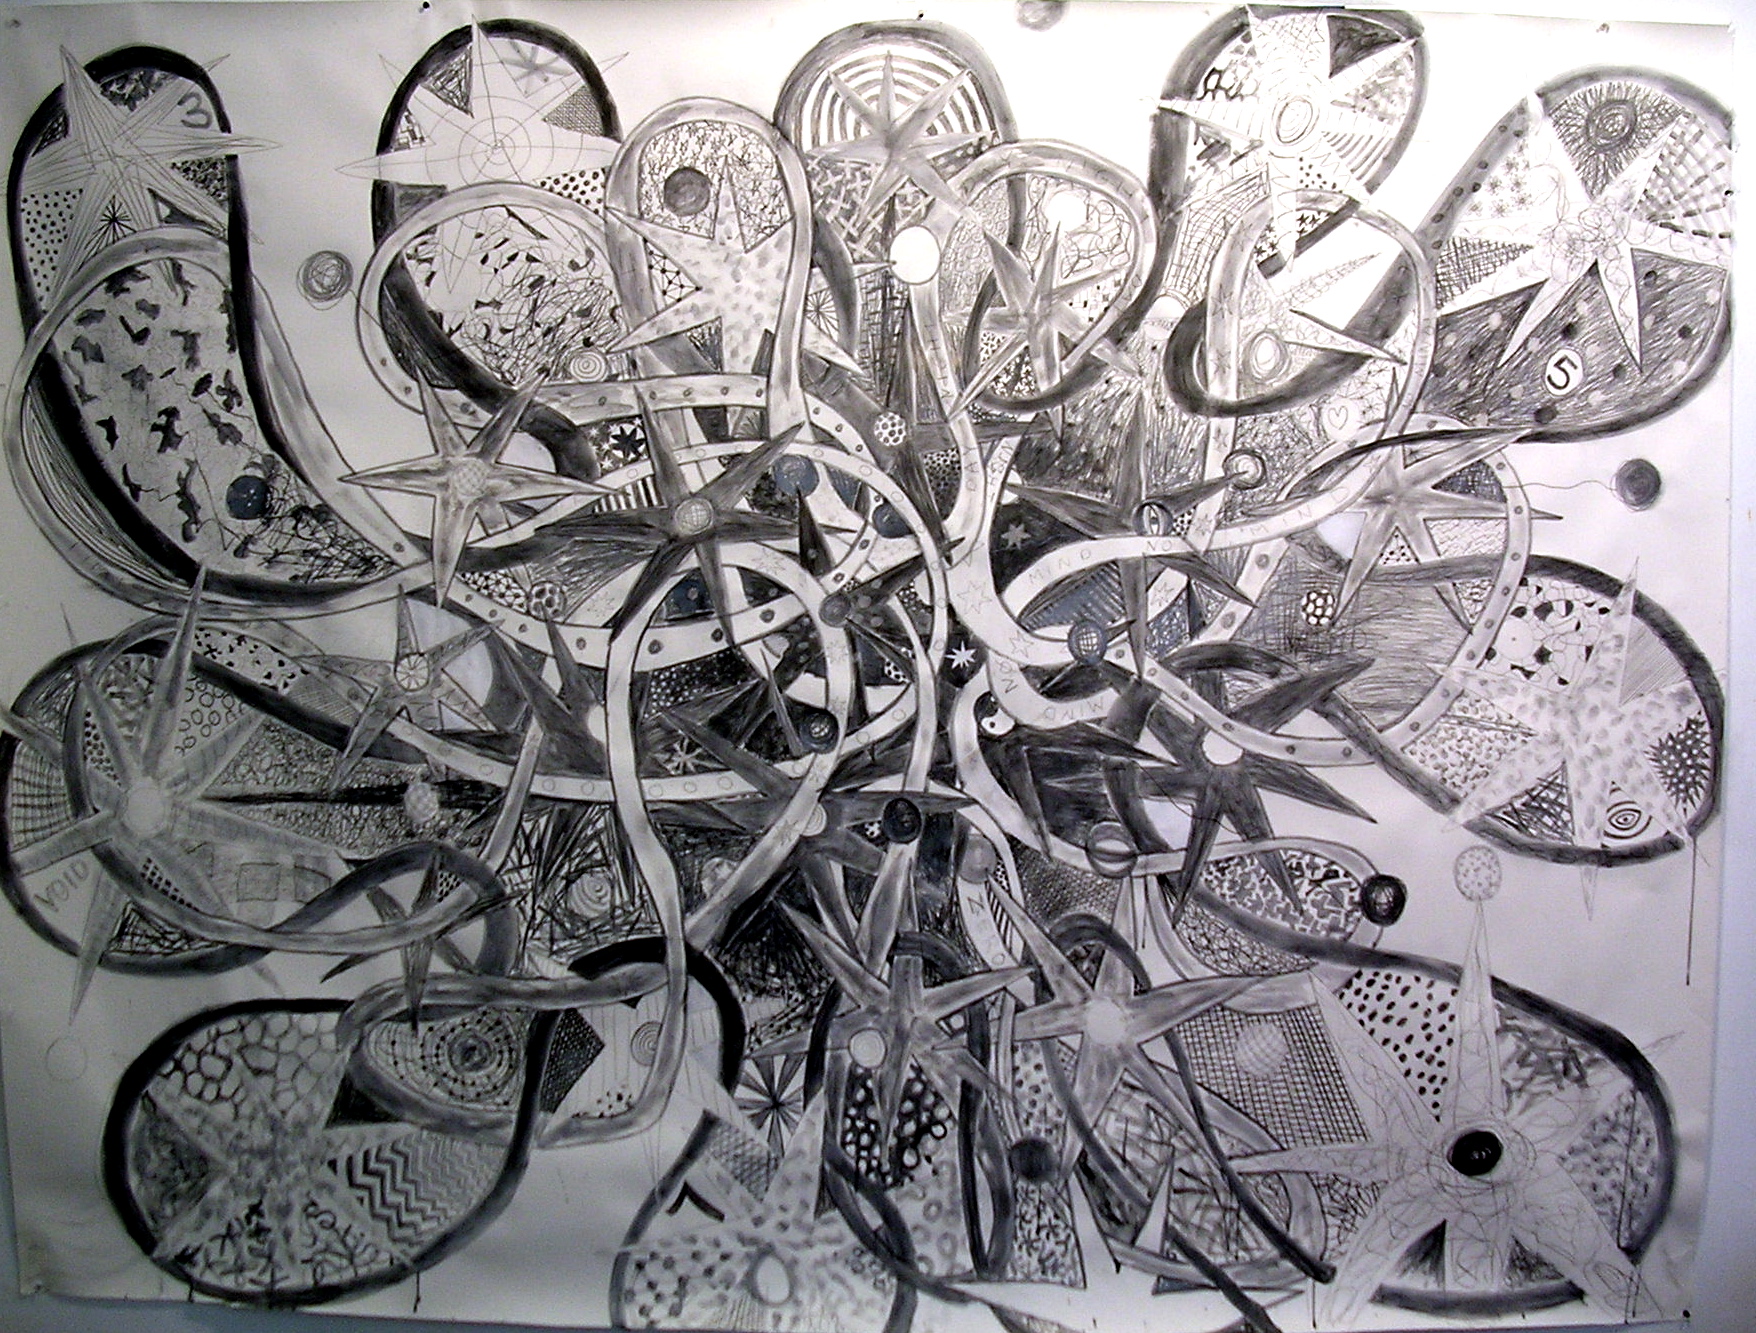  Big Bang 2 graphite on paper 48 x 70 in. 